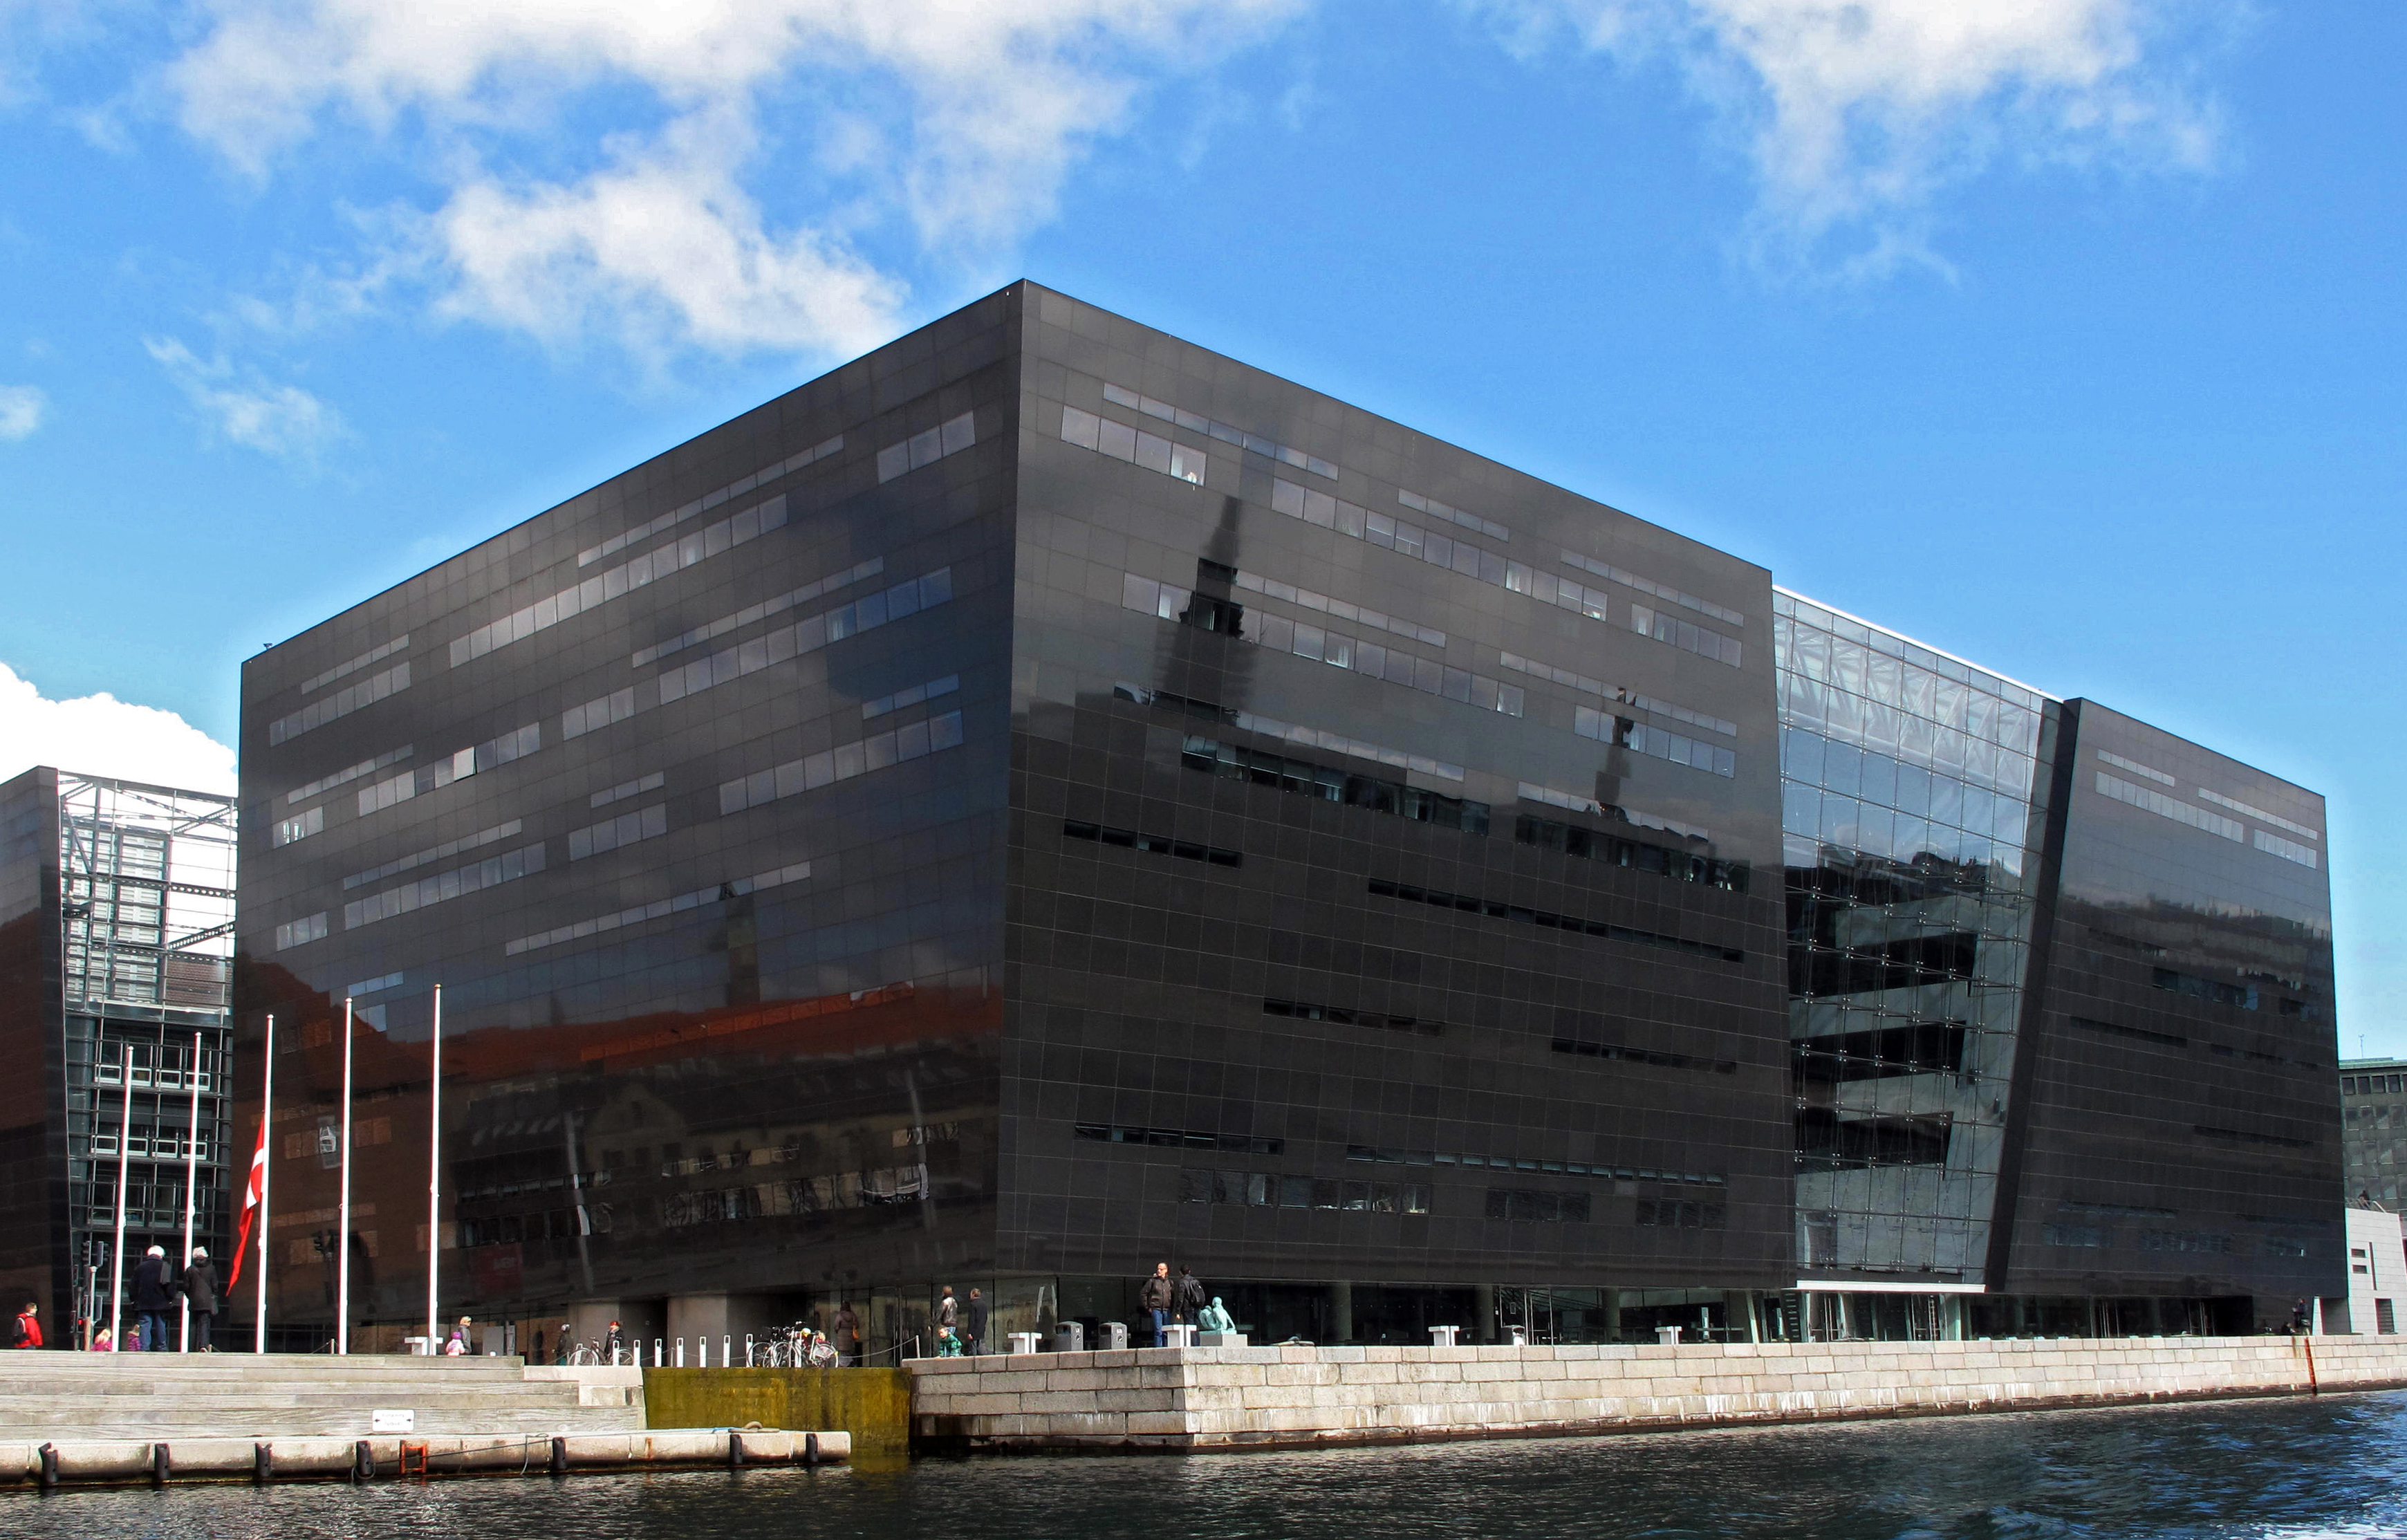 View of the modern waterfront extension to the Royal Danish Library The Black Diamond in Copenhagen on April 18, 2014. (Nicole Becker—dpa/Corbis)